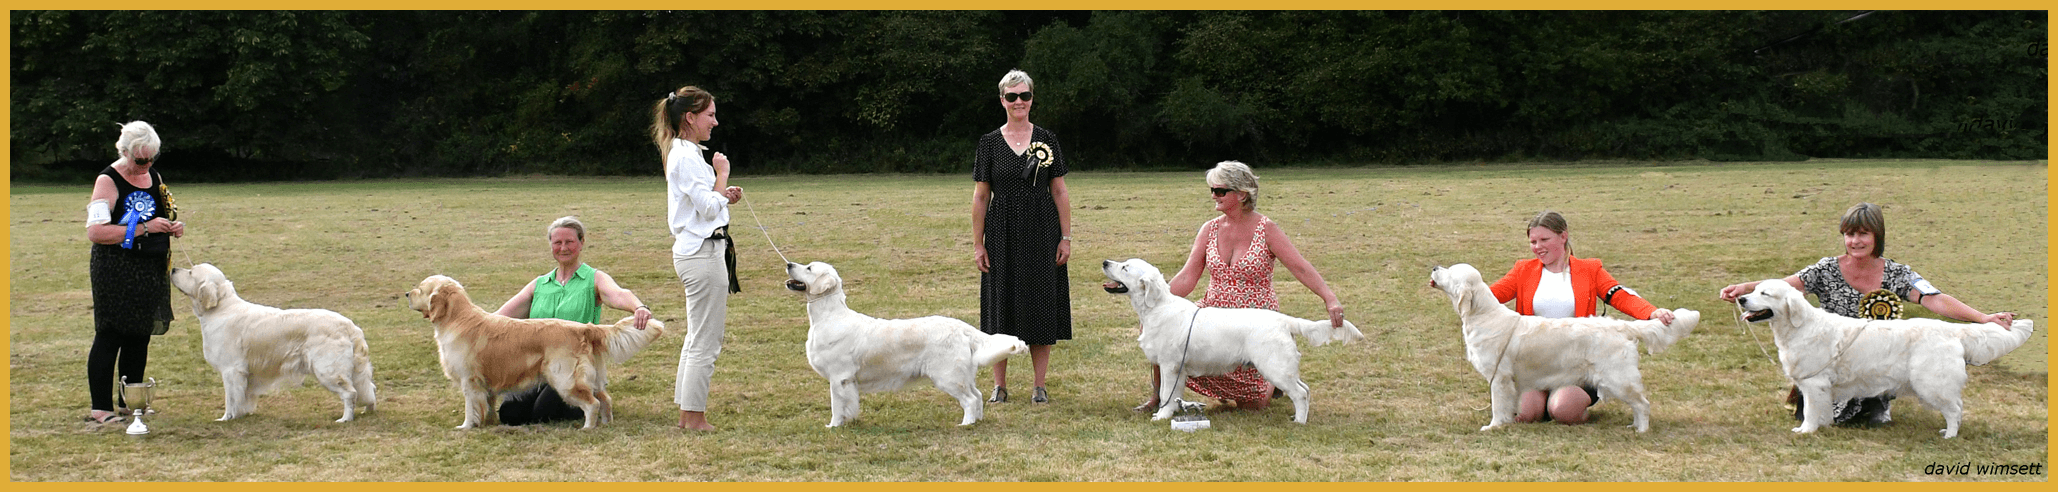 Two women with dogs in a field

Description automatically generated